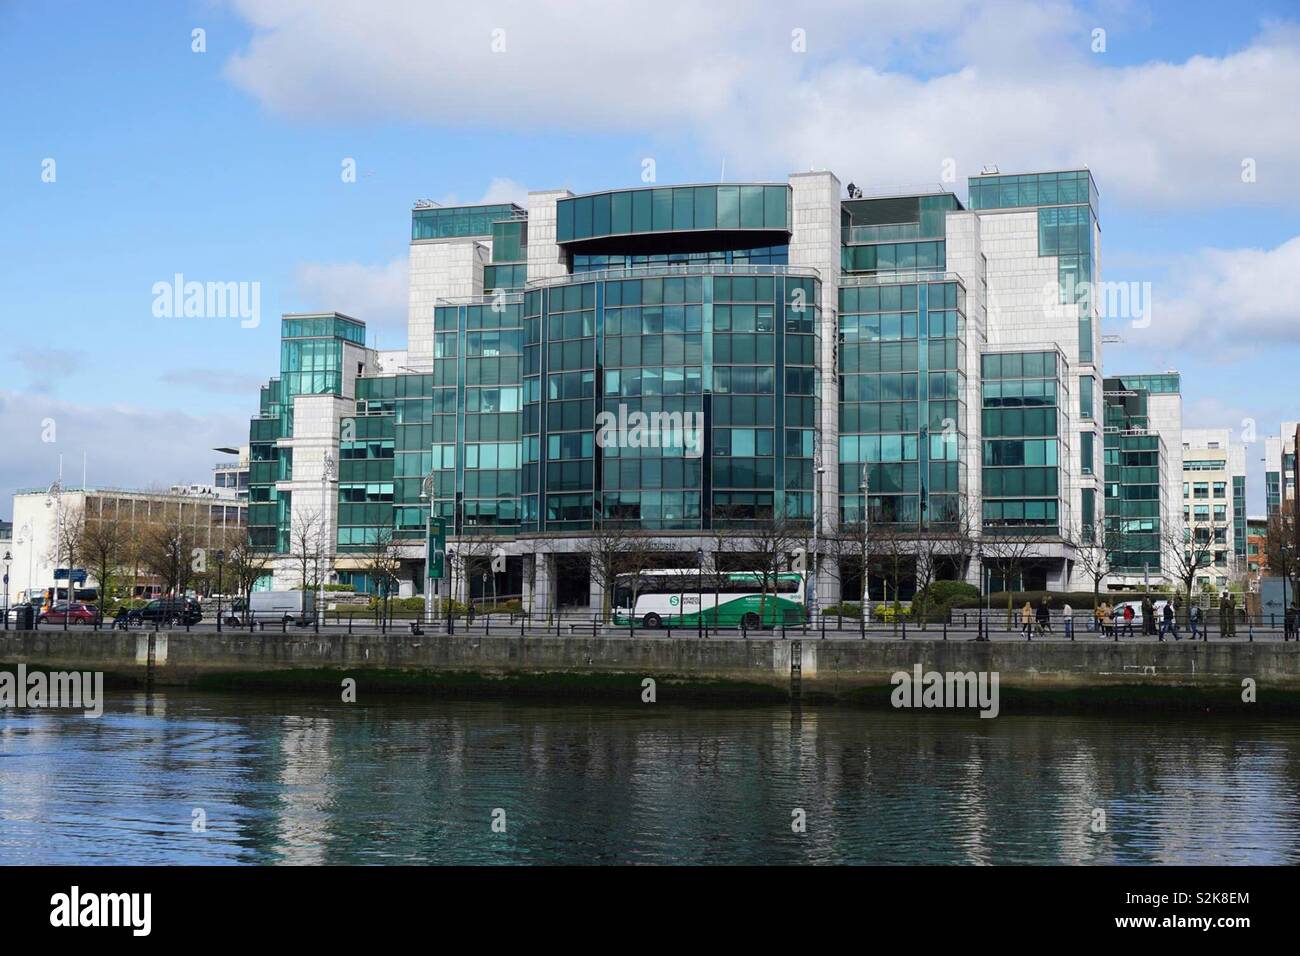 IFCS House at the River Liffey, Dublin, Ireland, Europe Stock Photo